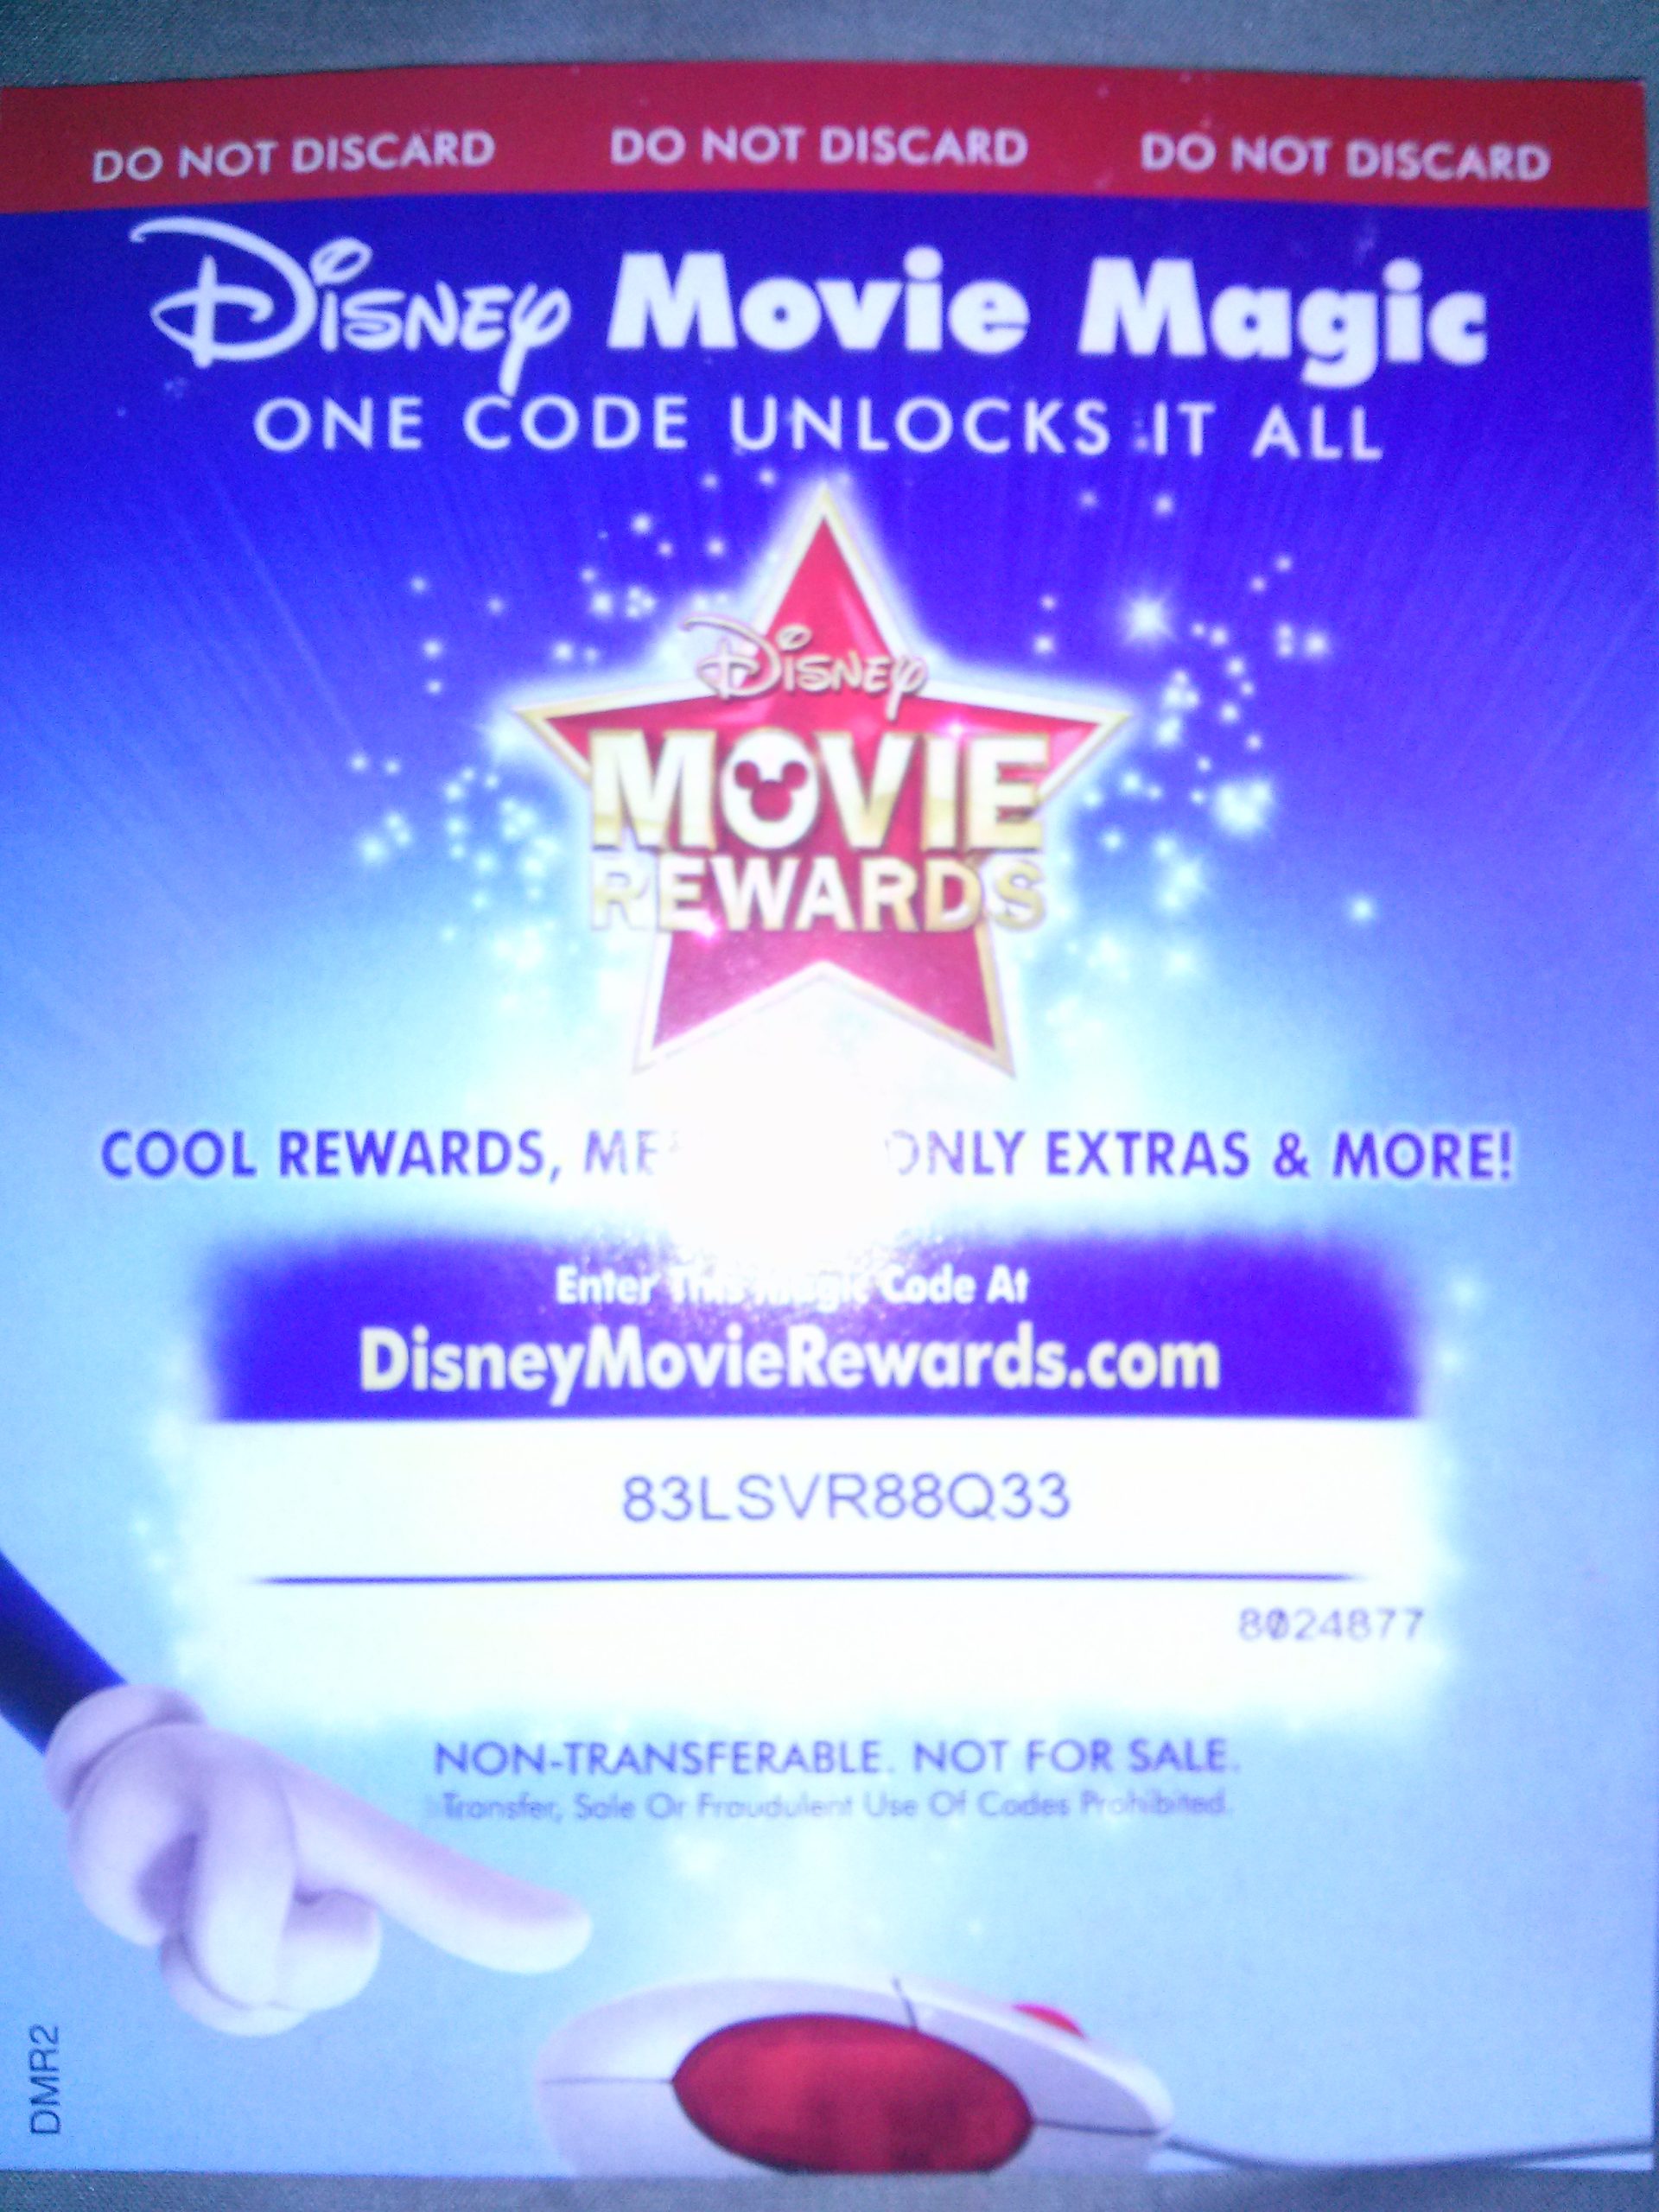 You are currently viewing 해결: Disney Movie Rewards 세션 오류 수정 제안